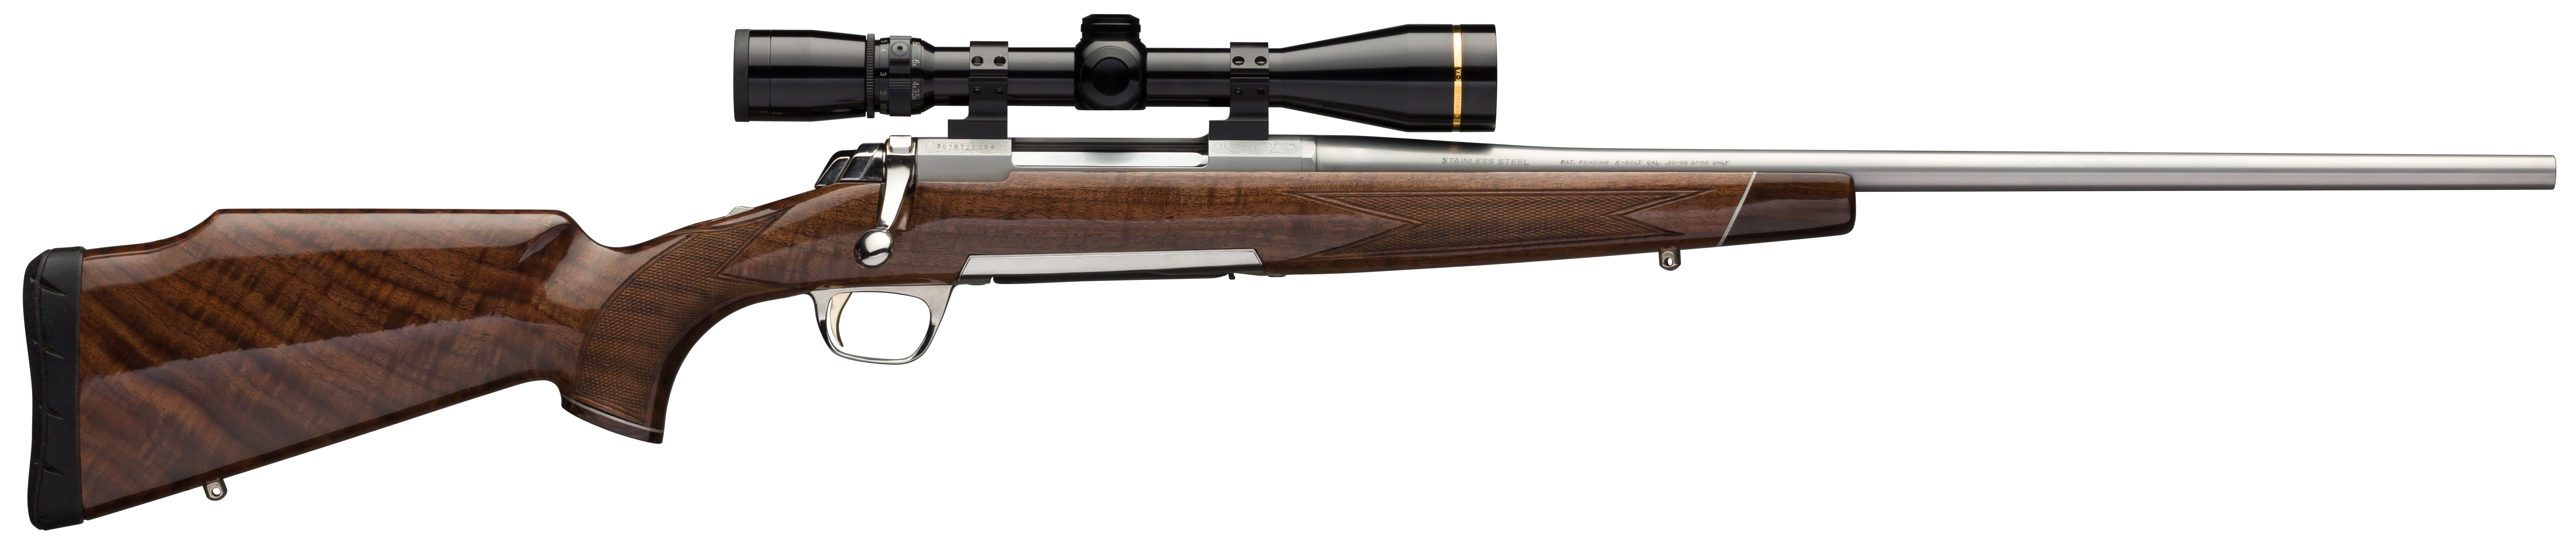 A Browning rifle chambered for 22-250 Remington